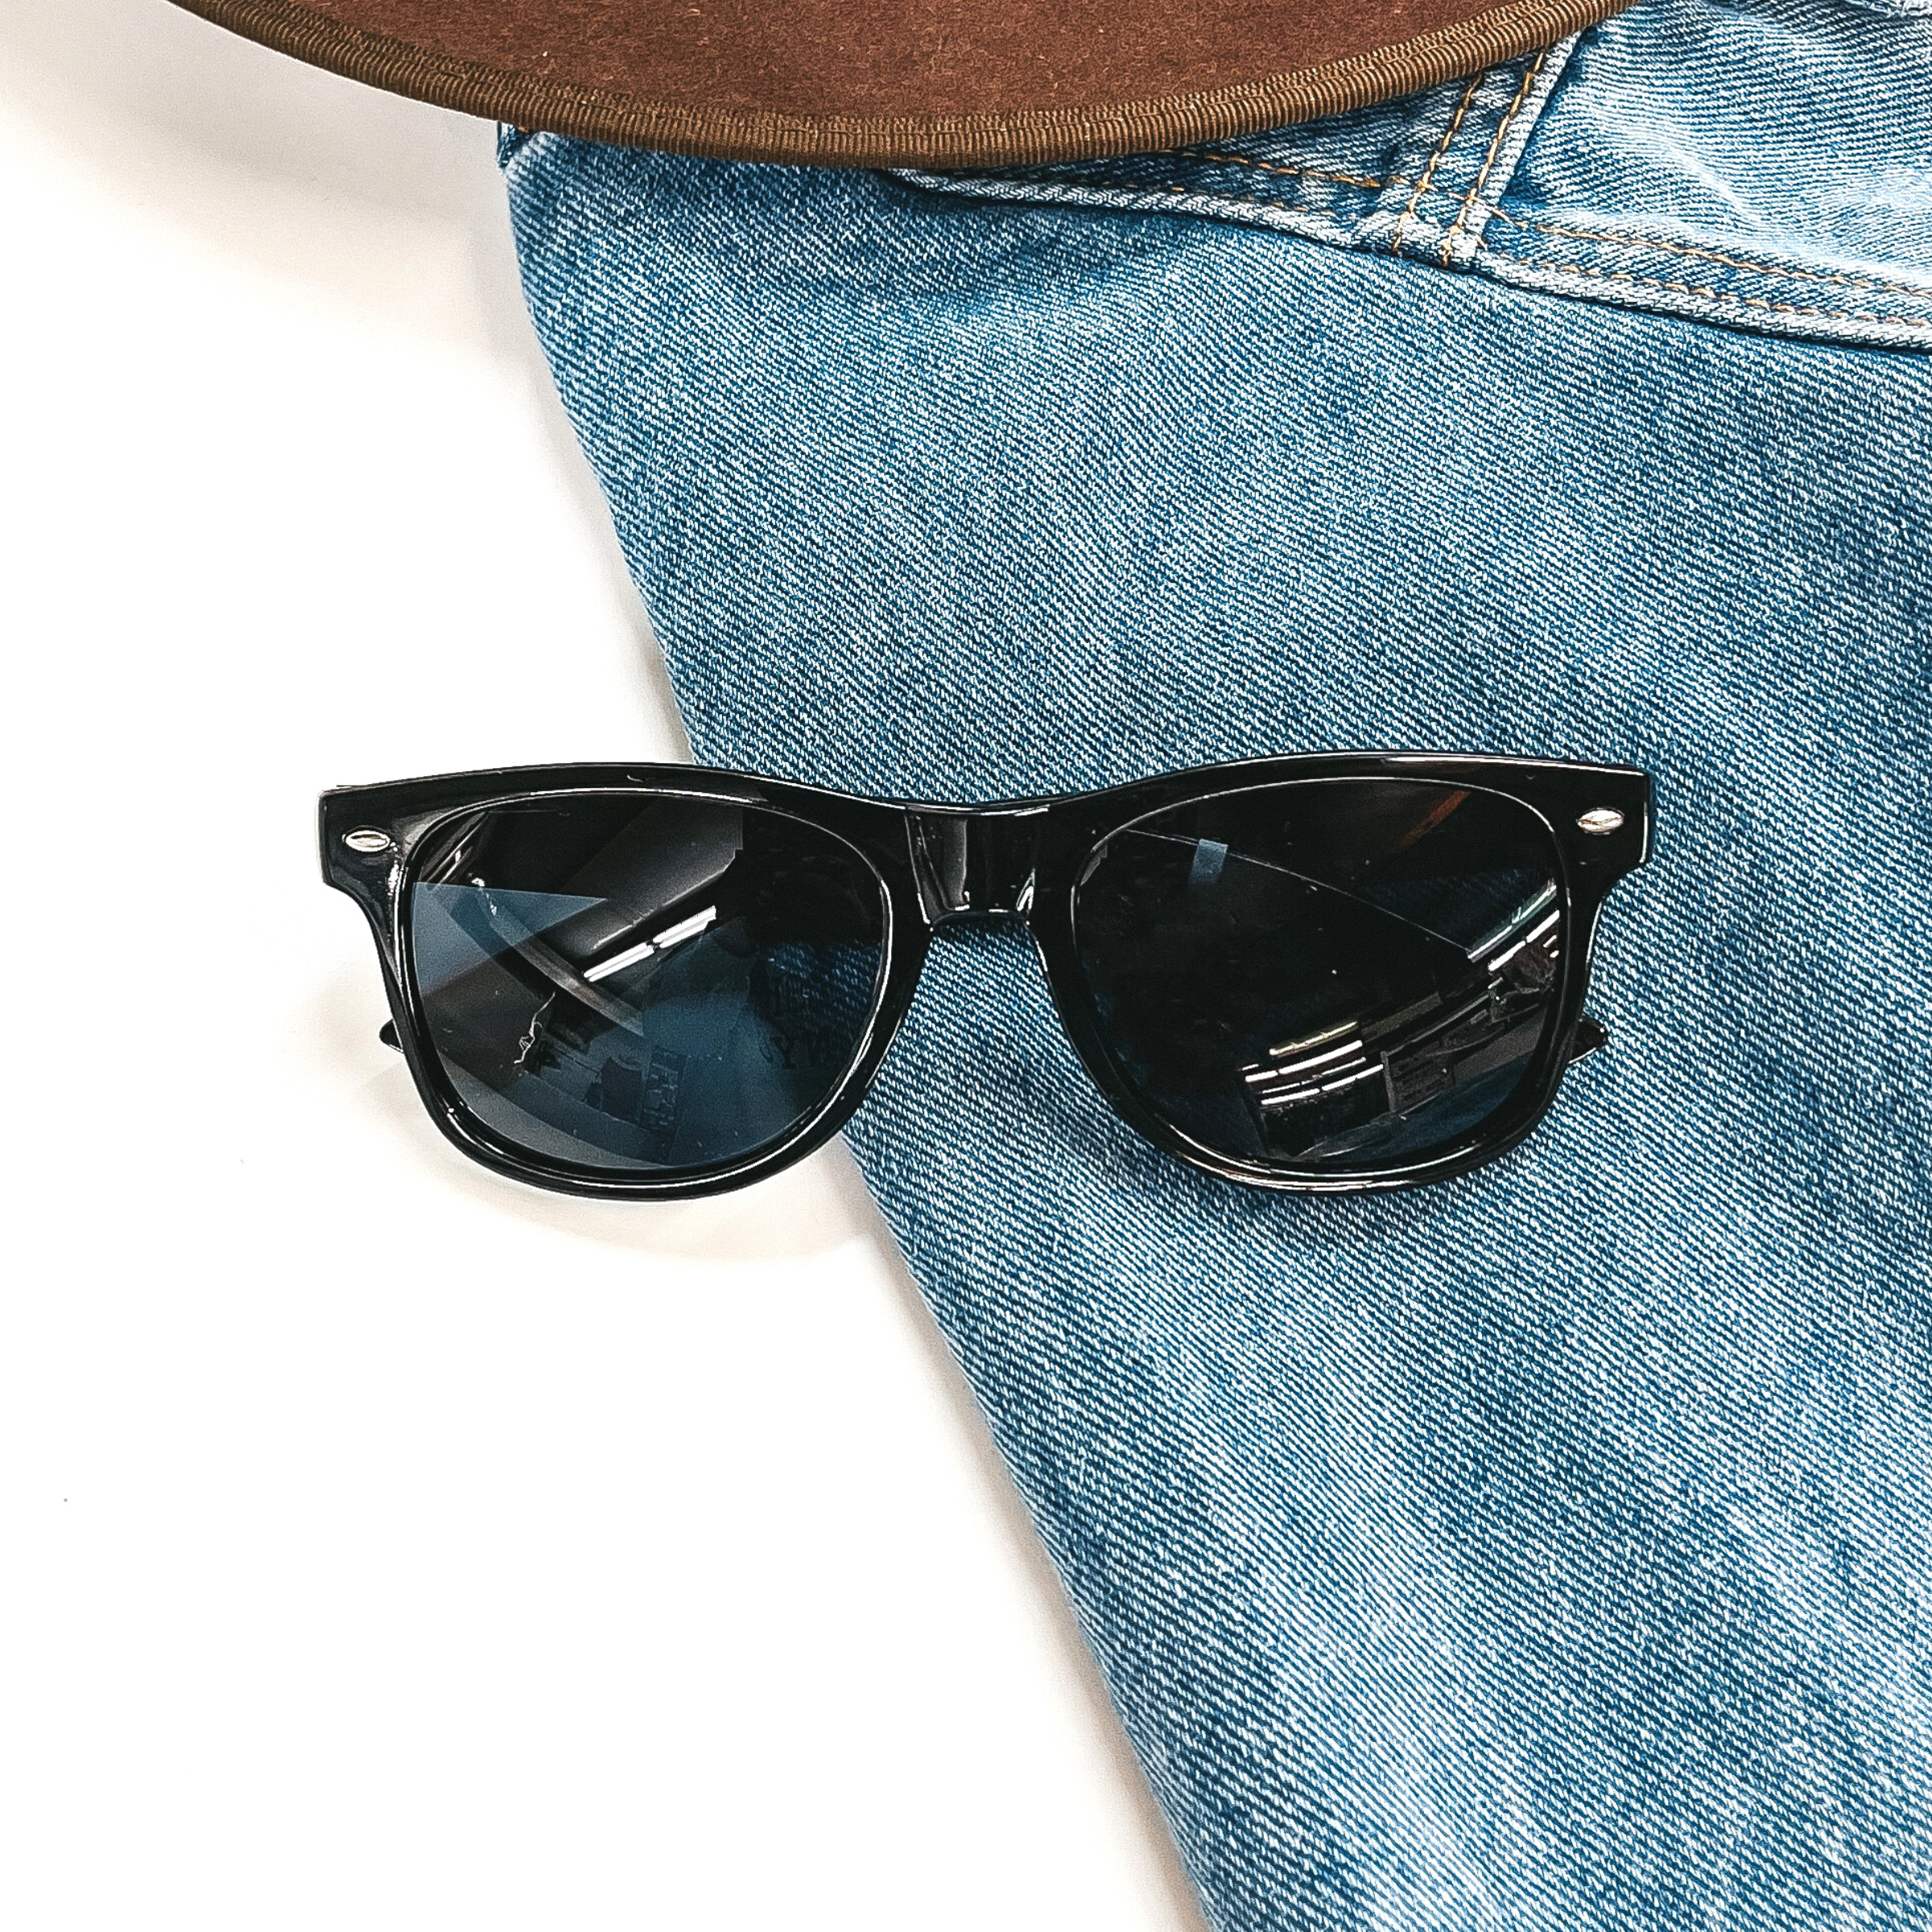 This is a black pair of sunglasses, the lenses are black/dark grey with silver  detailing in the side. These sunglasses are taken on a jean jacket sleeve with a  dark brown felt hat in the top as decor.